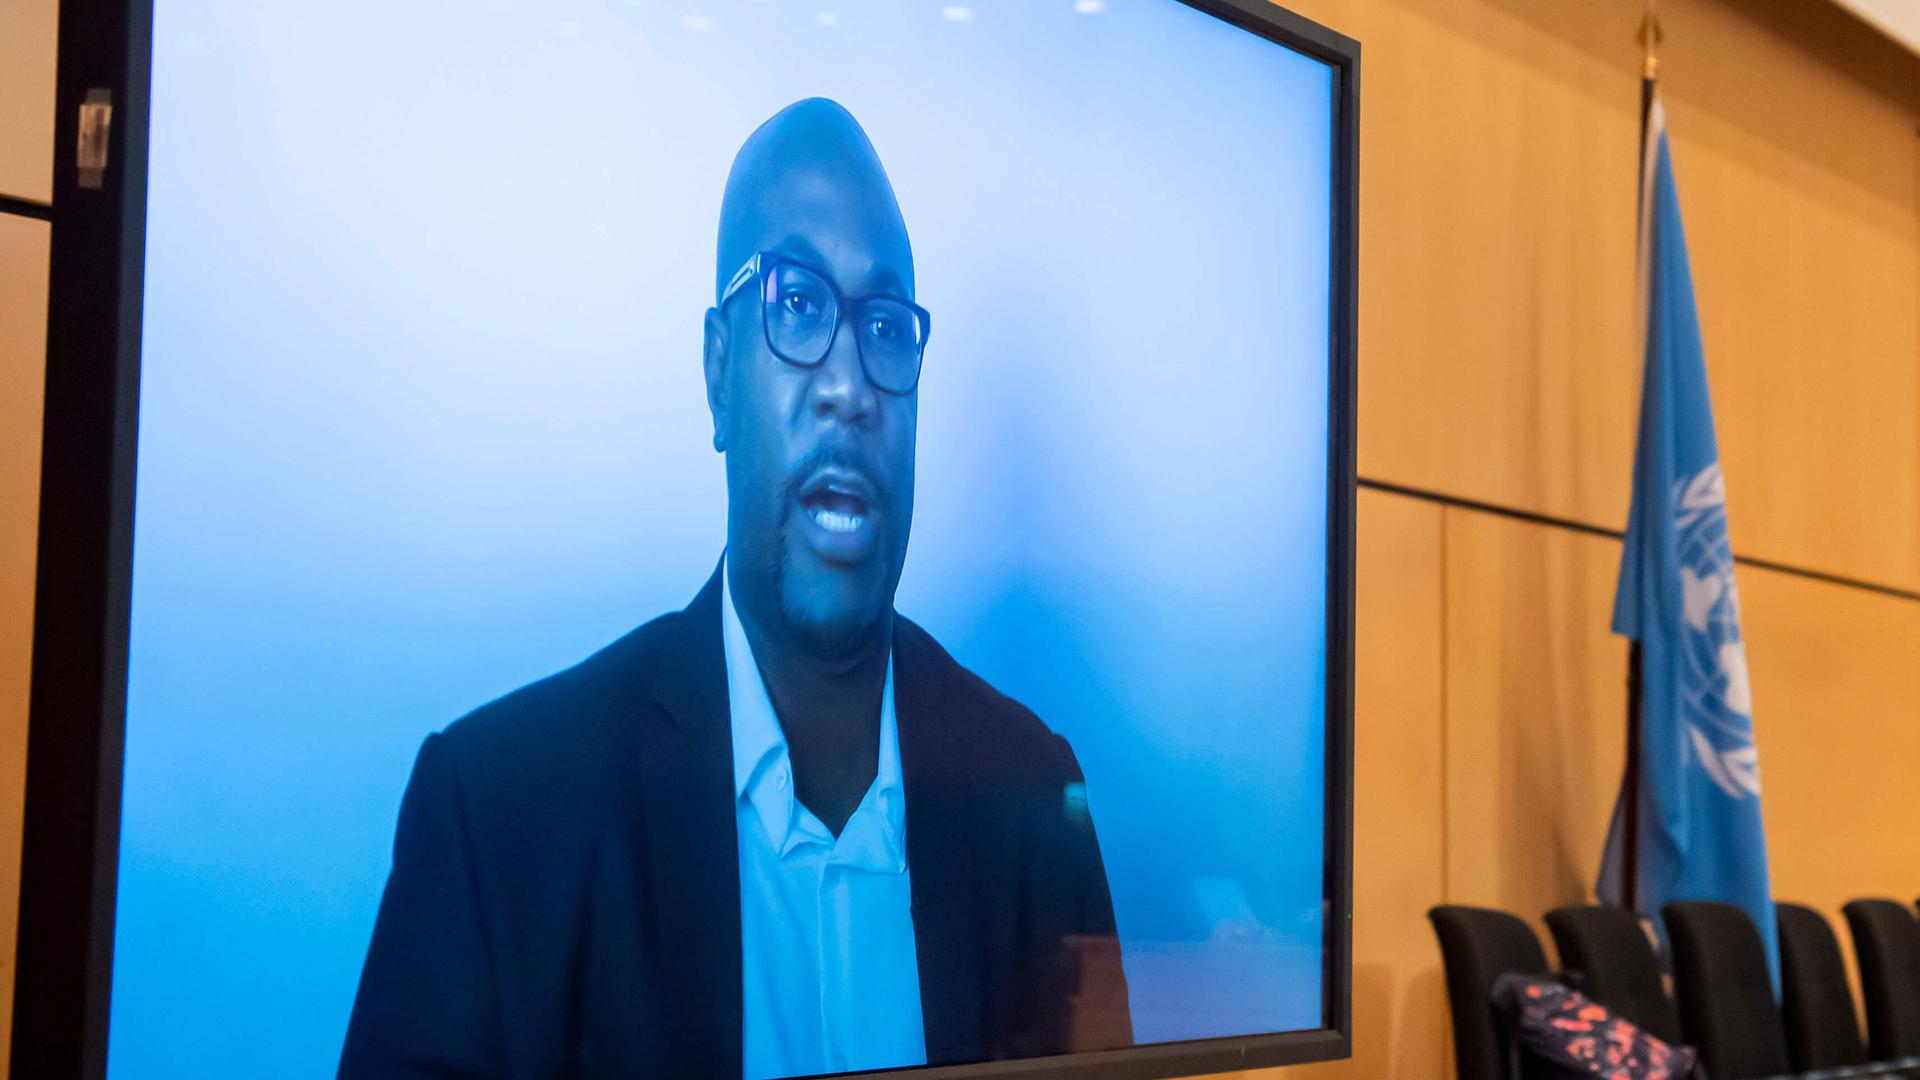 A Black American man wears glasses and a blue suit jacket and speaks via video with a blue background 